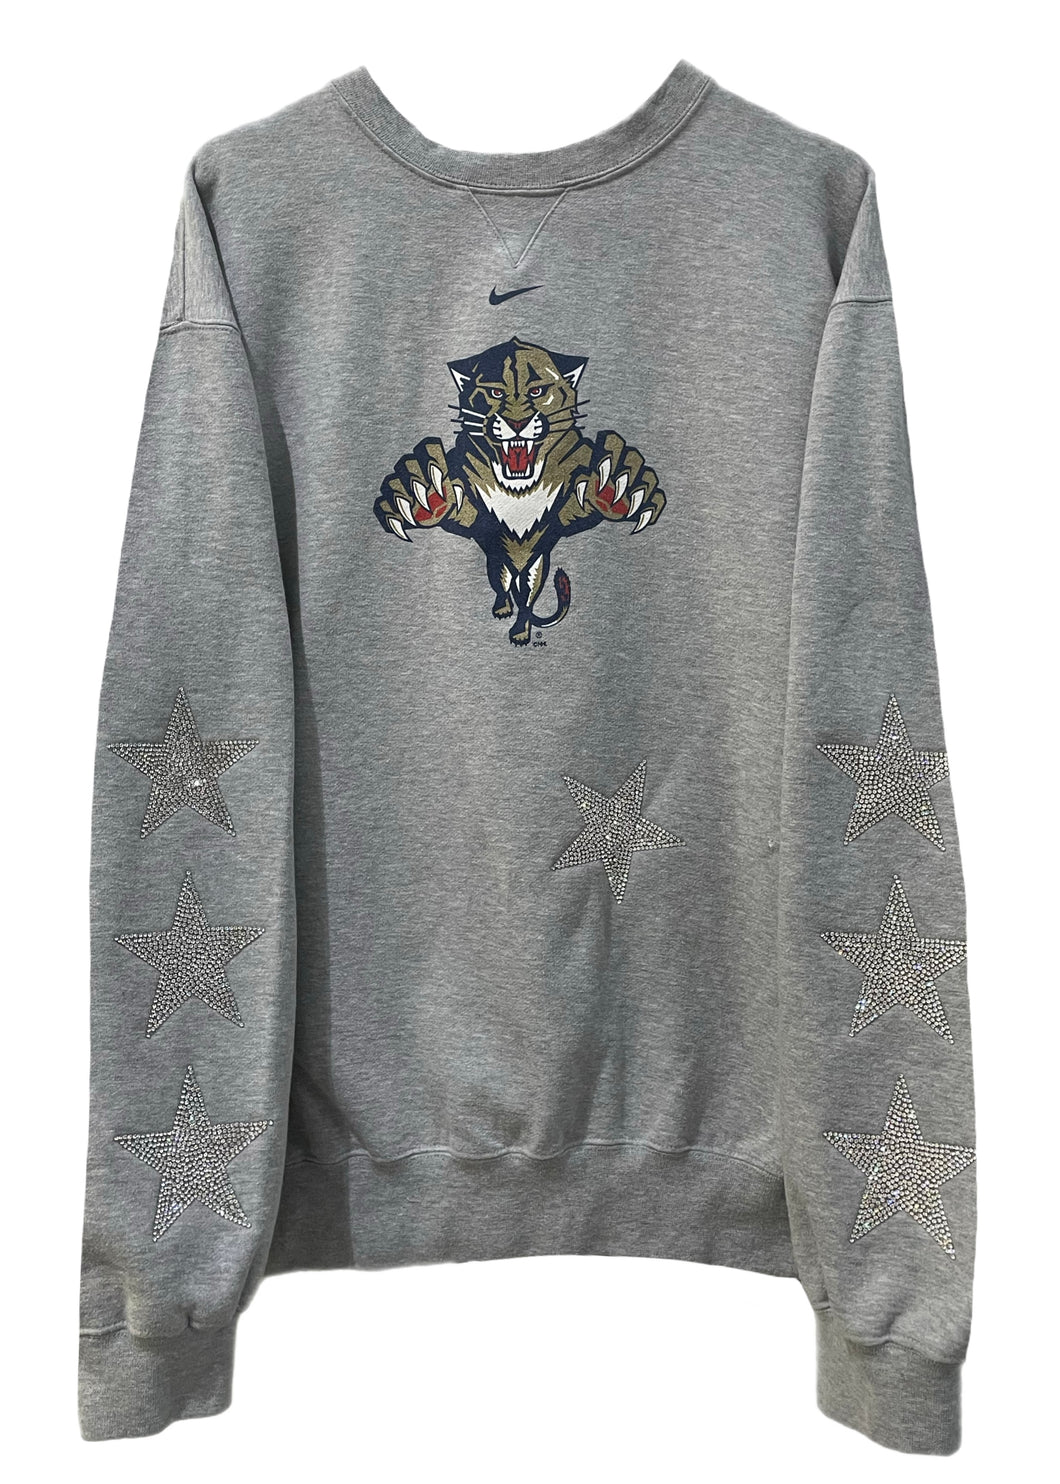 Florida Panthers, Hockey One of a KIND Vintage Sweatshirt with Three Crystal Star Design